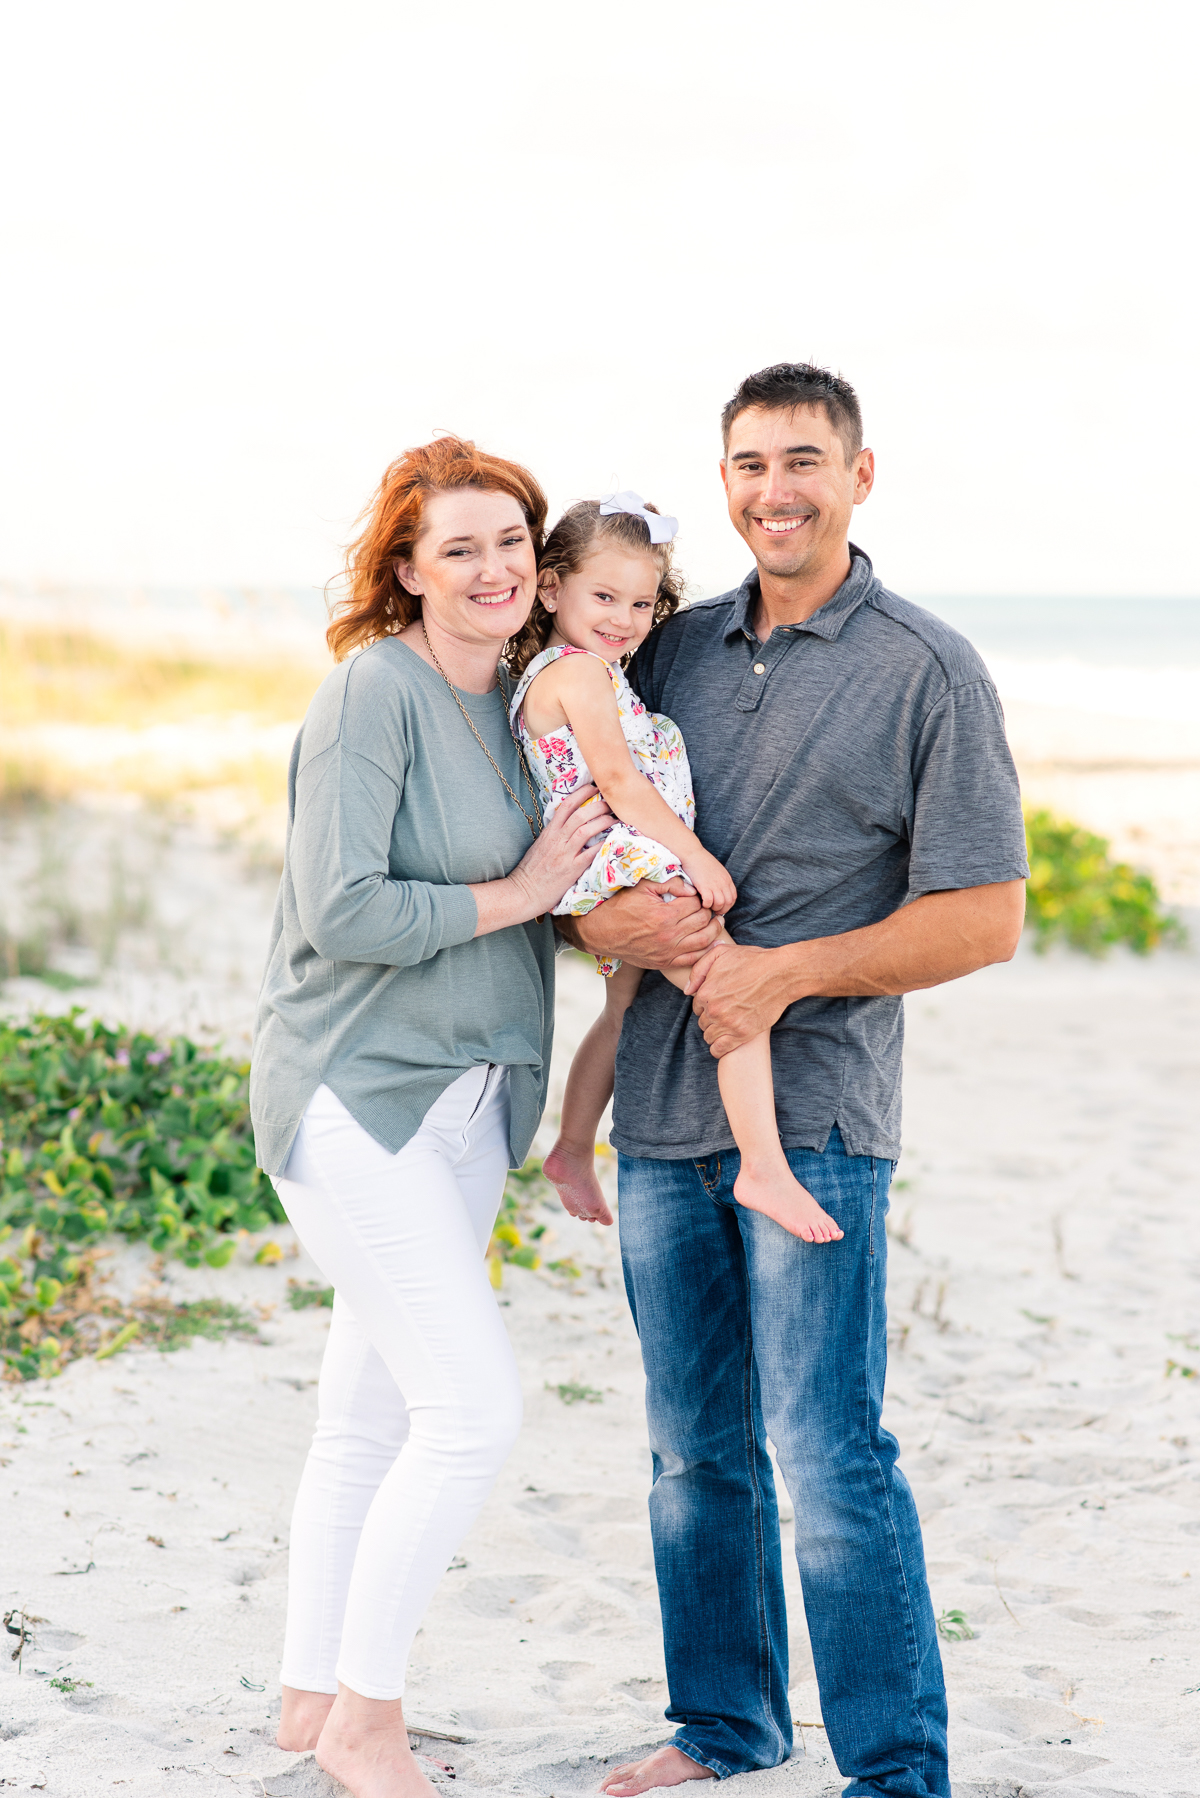 The "D" Family's Beach Session Melbourne Florida